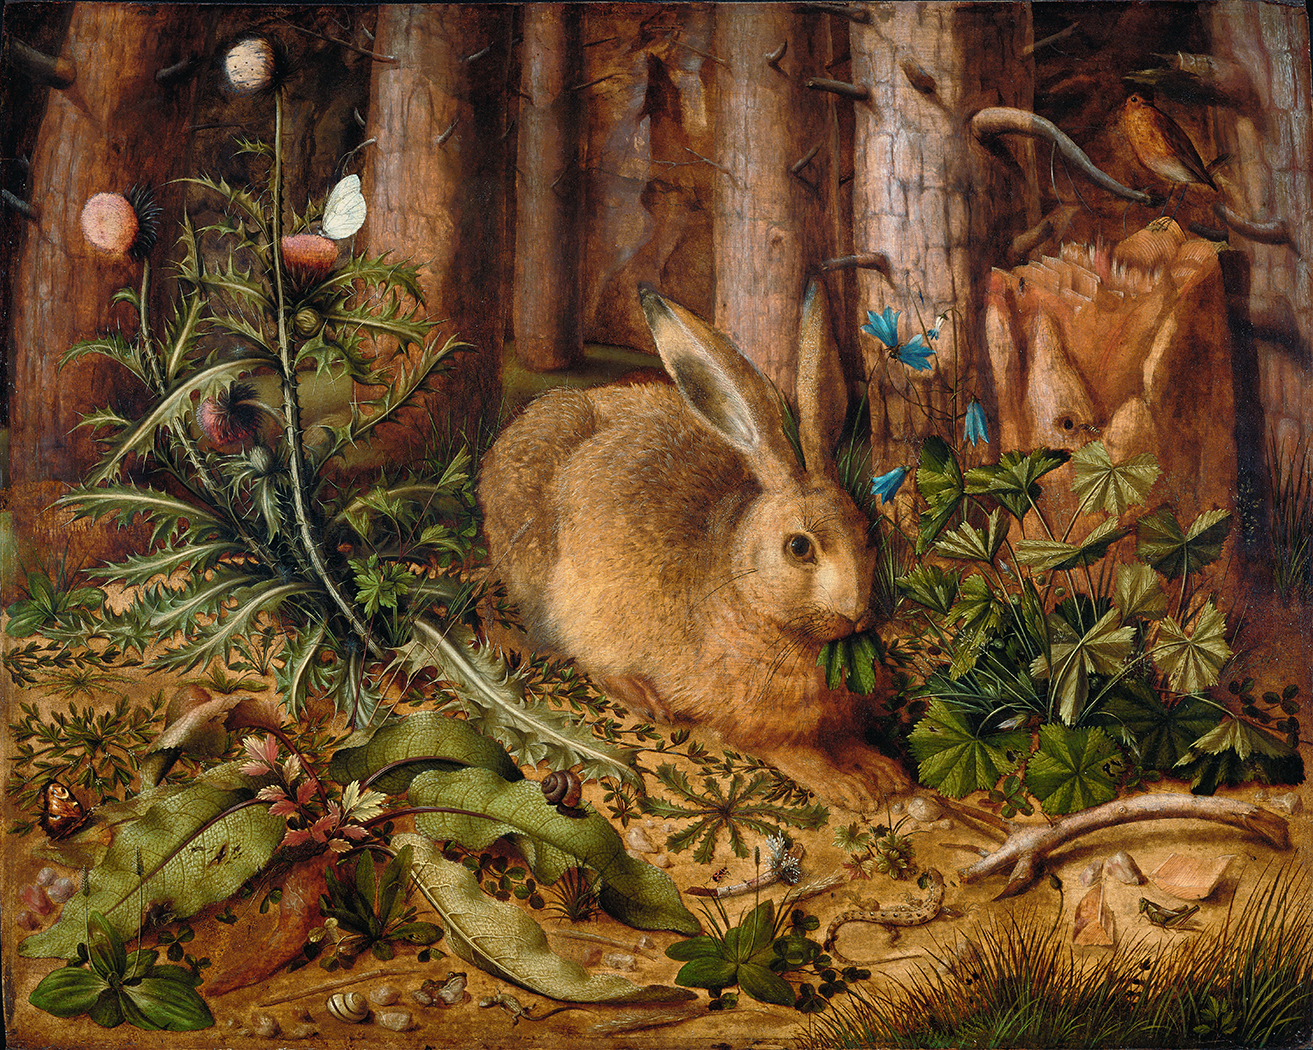 Farm/Pastoral Farm Rabbit in Forest Oil Painting Print on ...